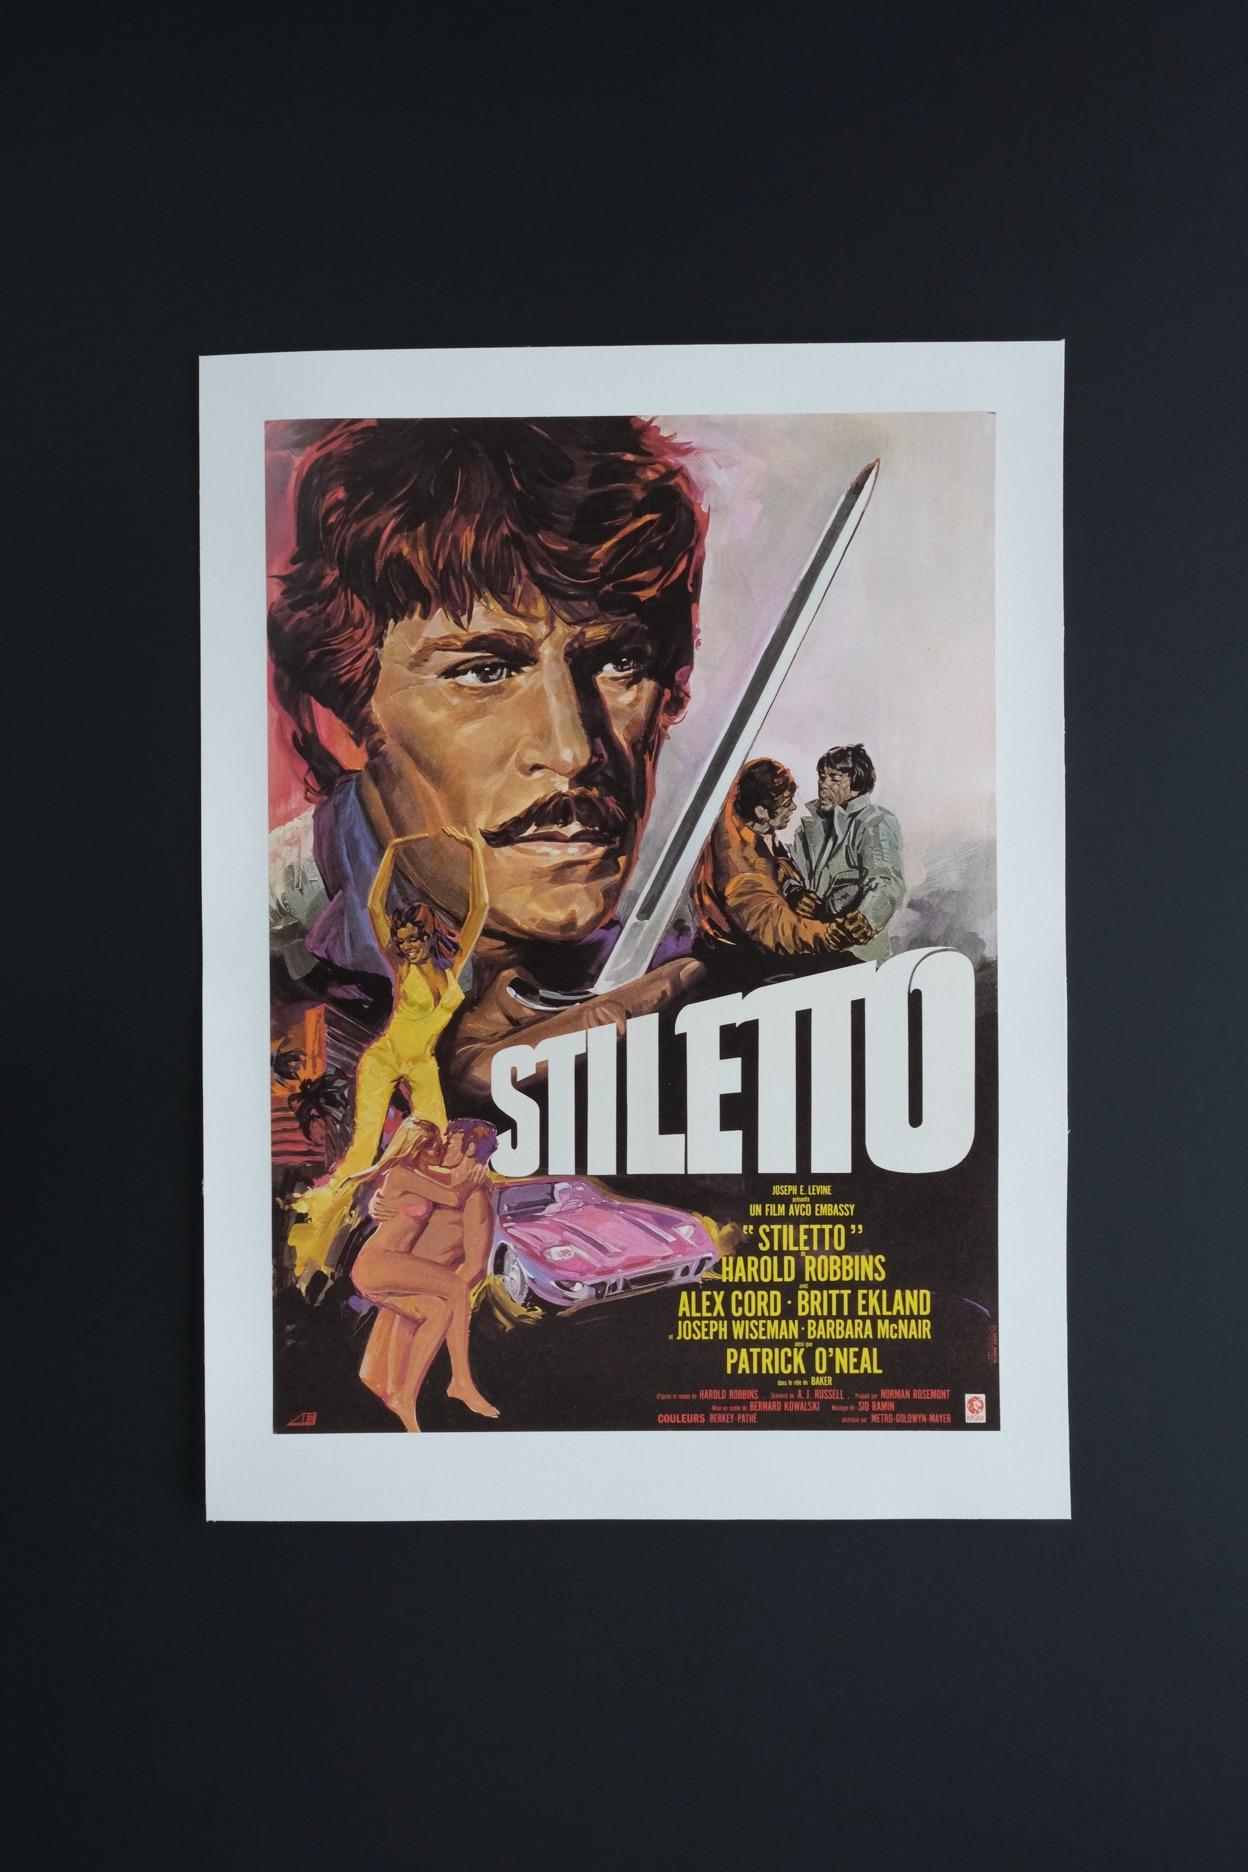 Size: Italian Insert

Condition: Mint

Dimensions: 610mm x 450mm (inc. Linen Border)

Type: Original Lithographic Print - Linen Backed

Year: 1969

Details: An incredibly rare and one of the few remaining original posters/inserts produced